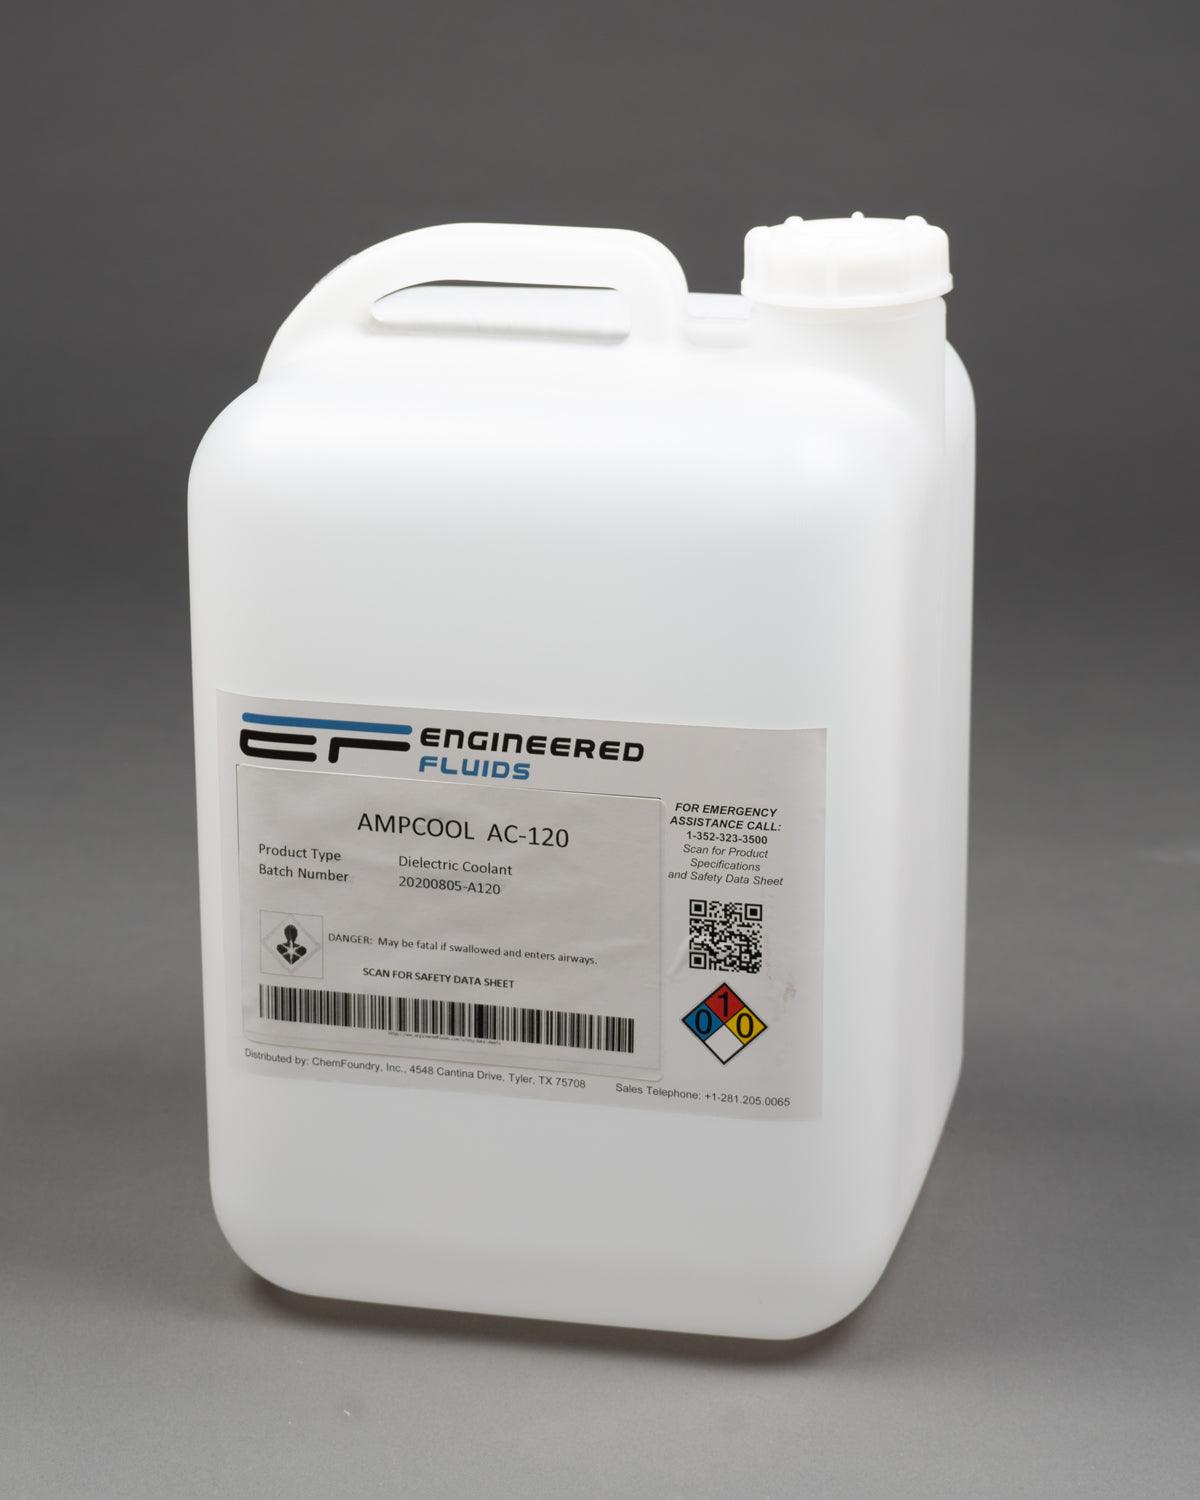 AmpCool® AC-120 Dielectric Coolant - Engineered Fluids